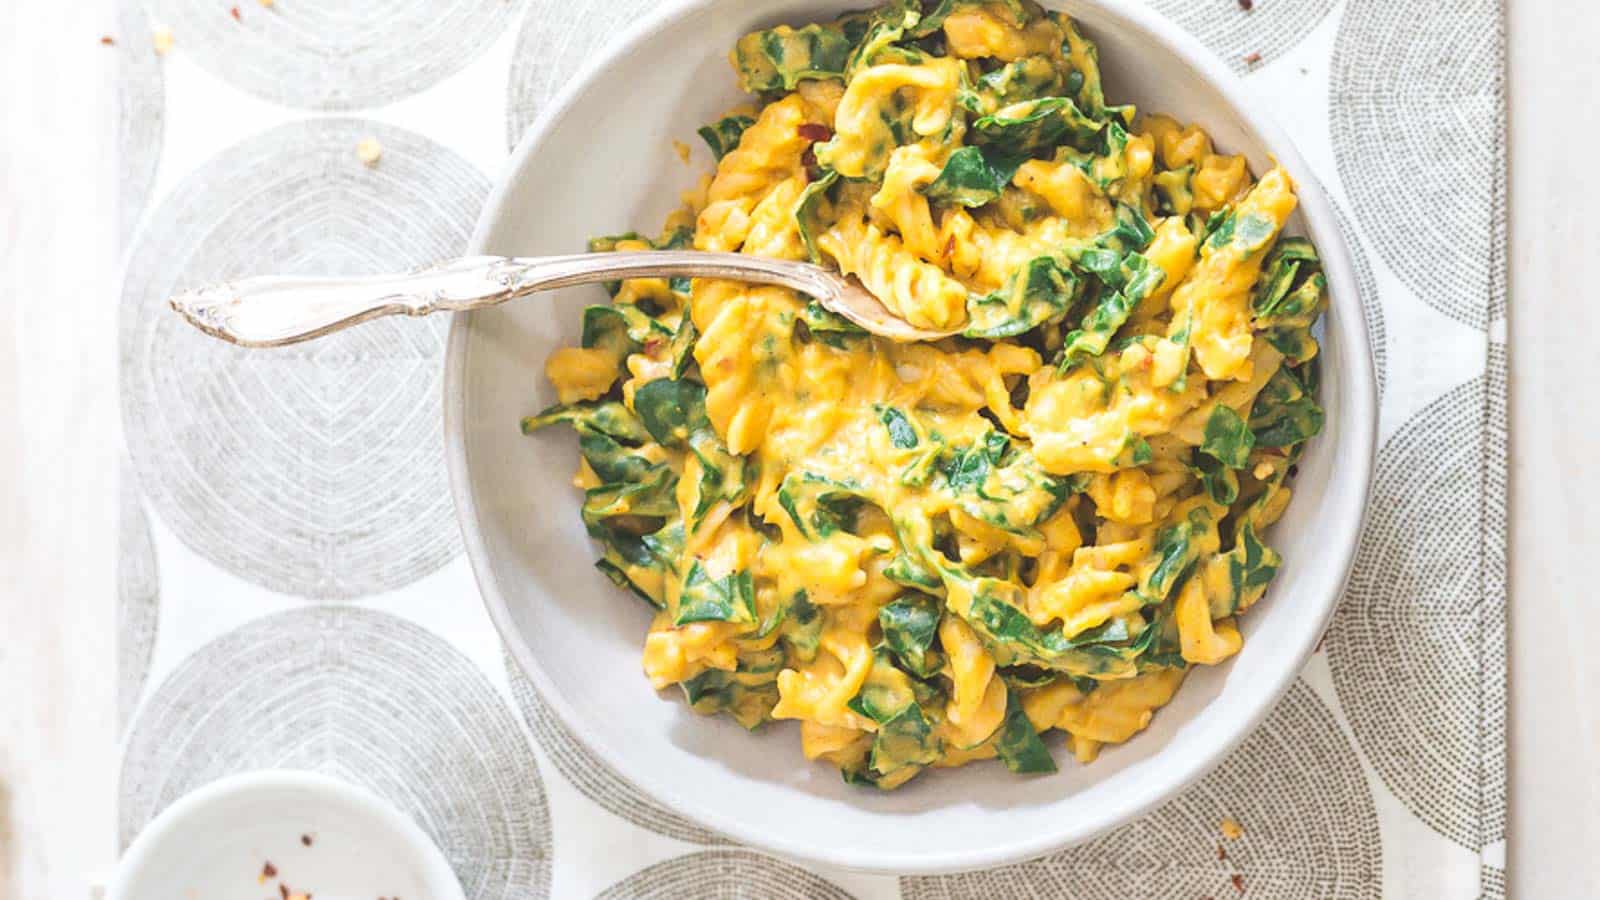 Creamy pumpkin pasta with garlic and tuscan kale in a bowl with a spoon.